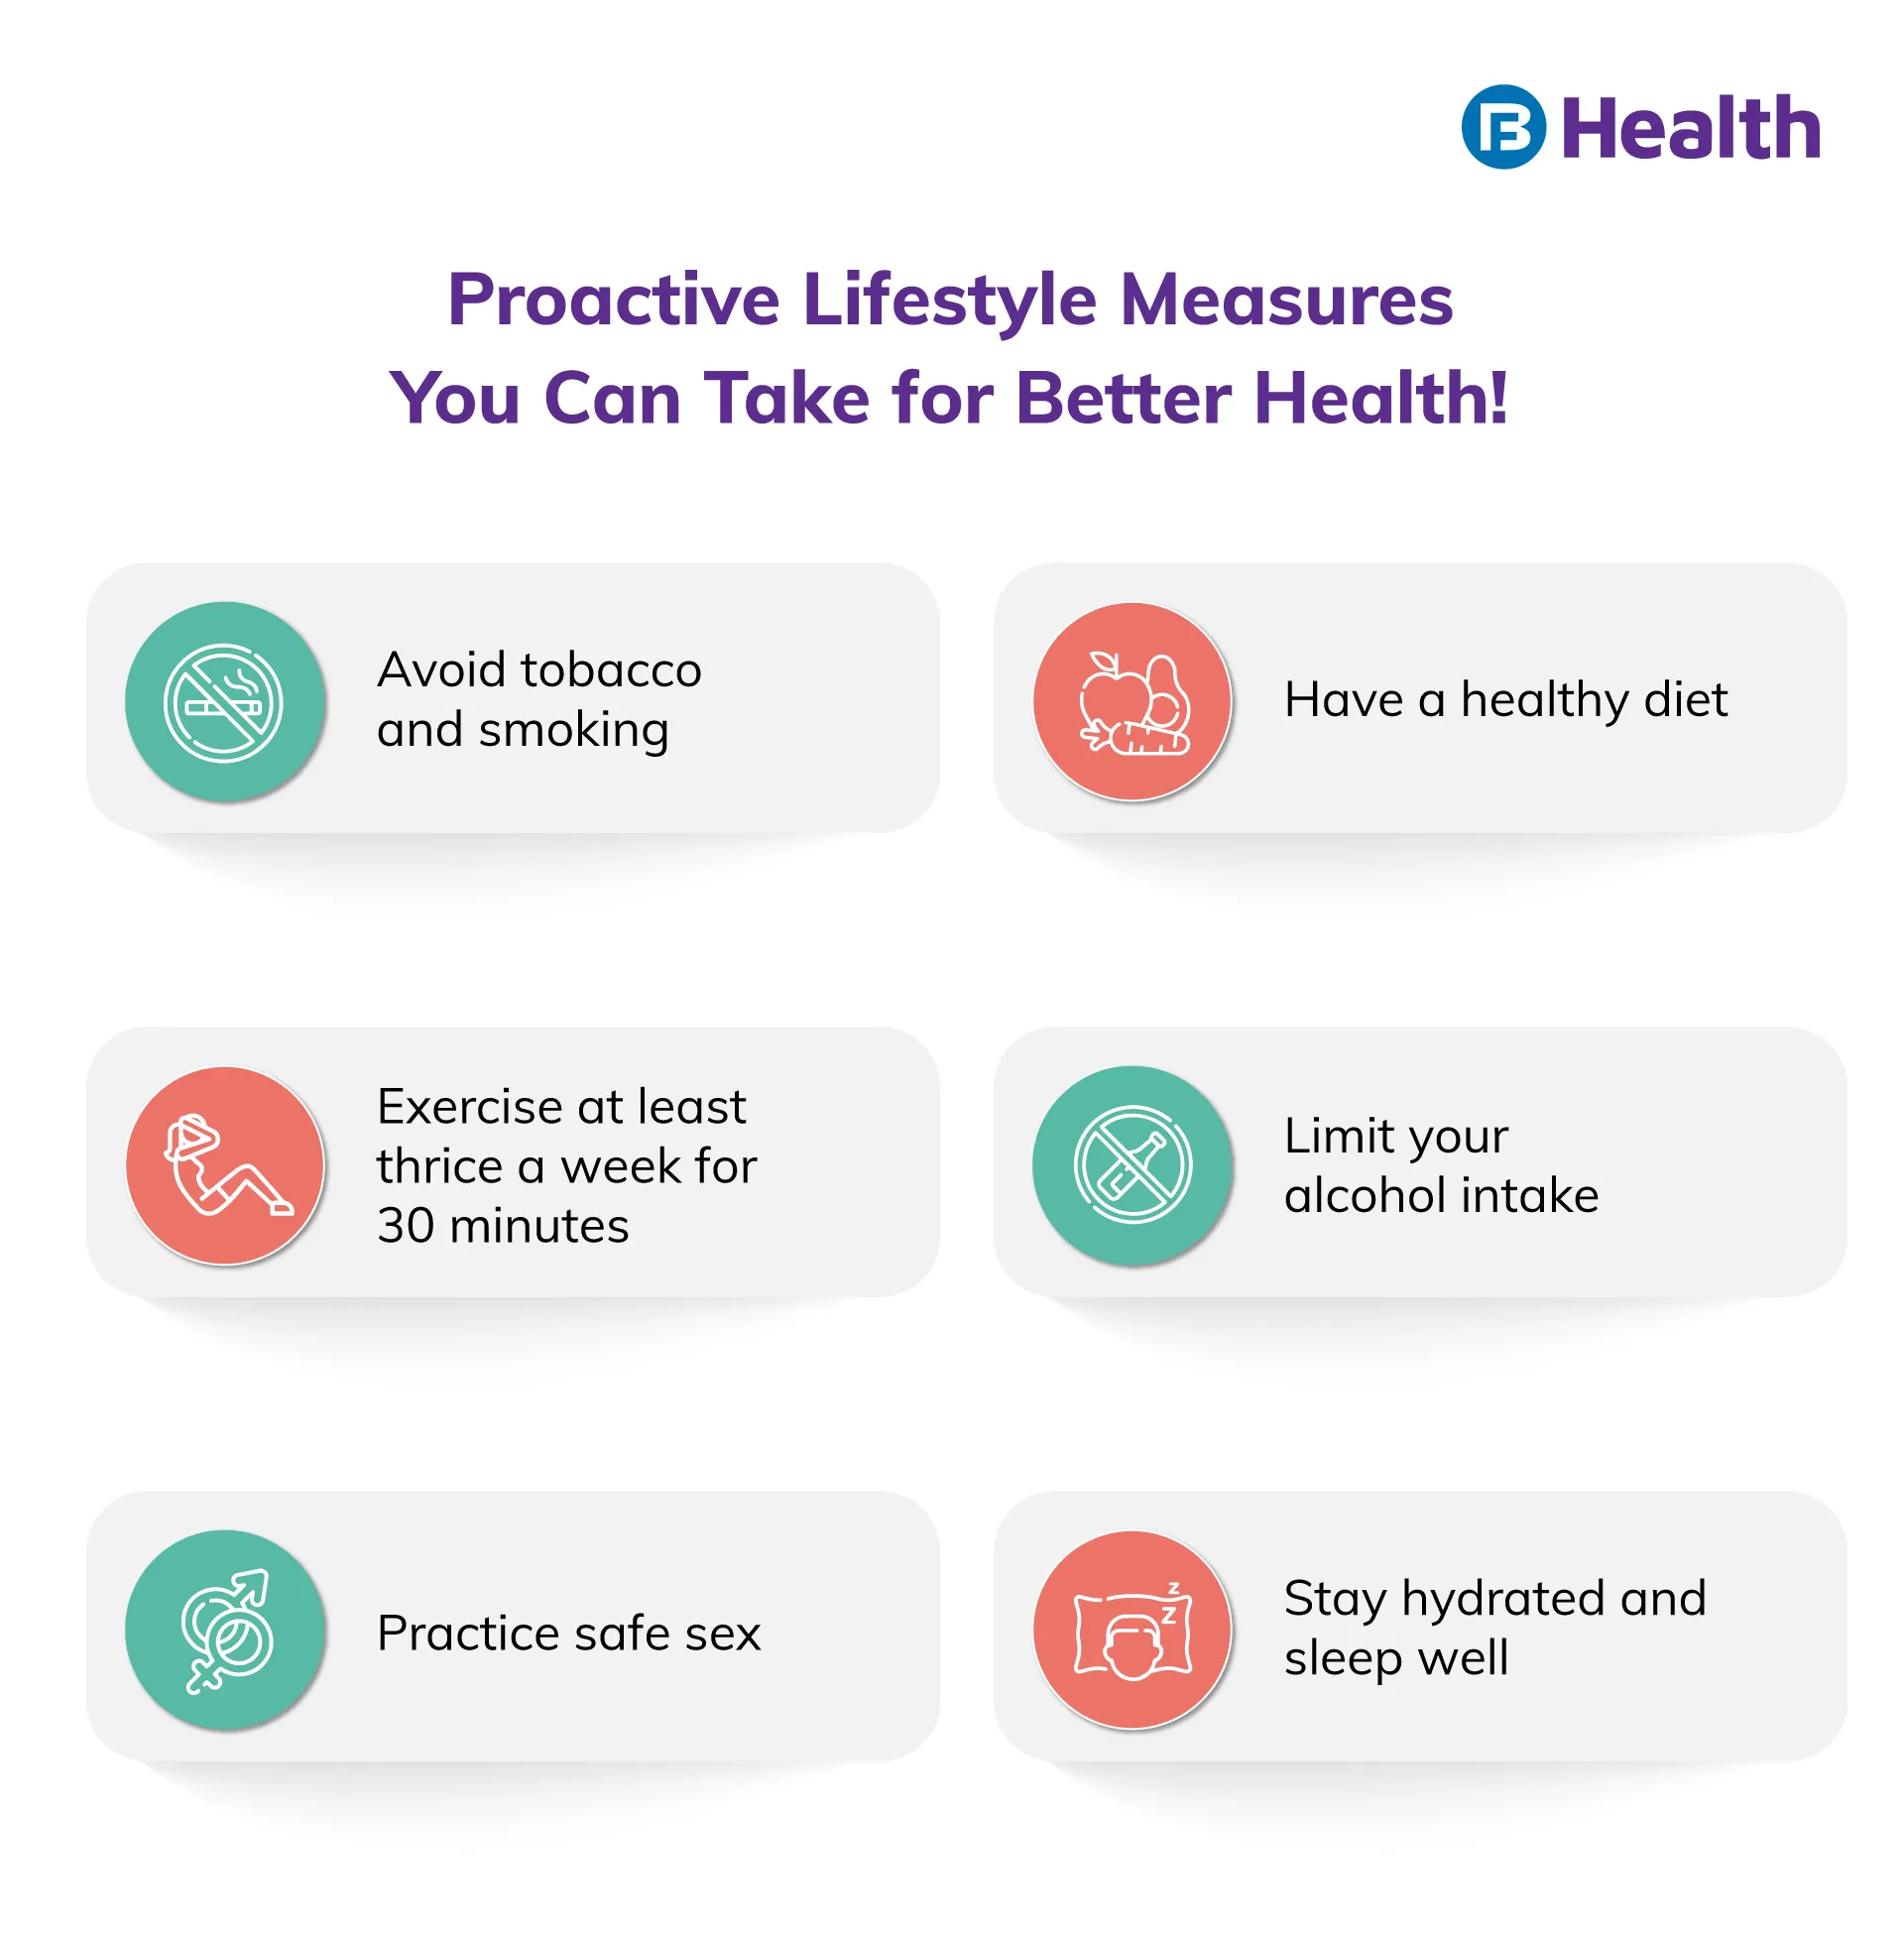 Proactive Lifestyle Measures to take for Preventive Health Care 